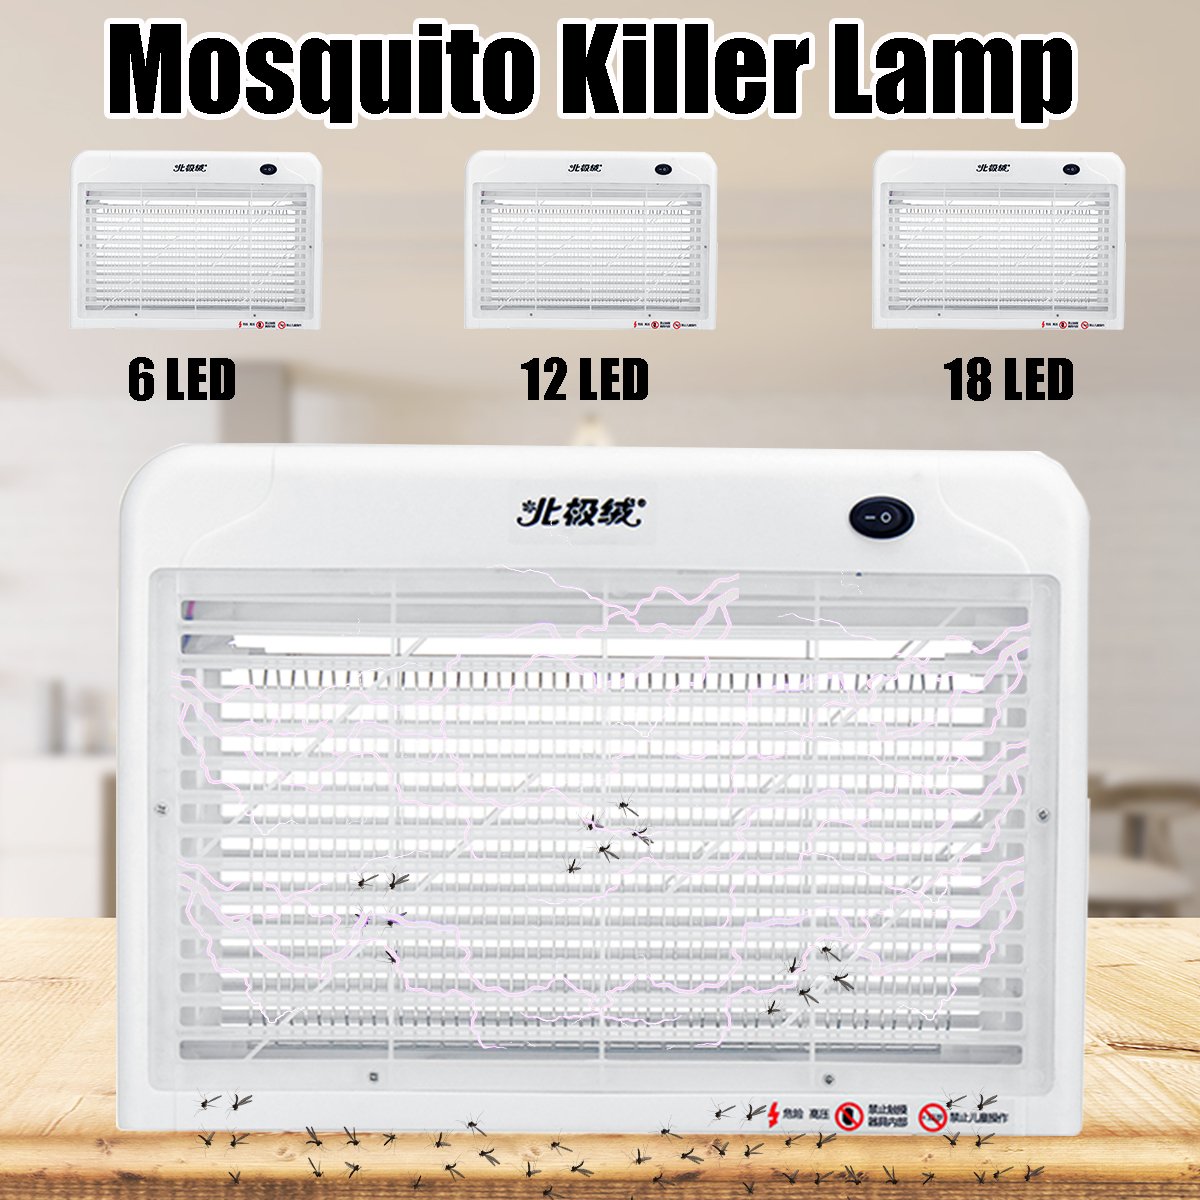 Electric-Fly-Bug-Zapper-Mosquito-Insect-Killer-Pest-Control-LED-Light-Trap-Lamp-1522934-1